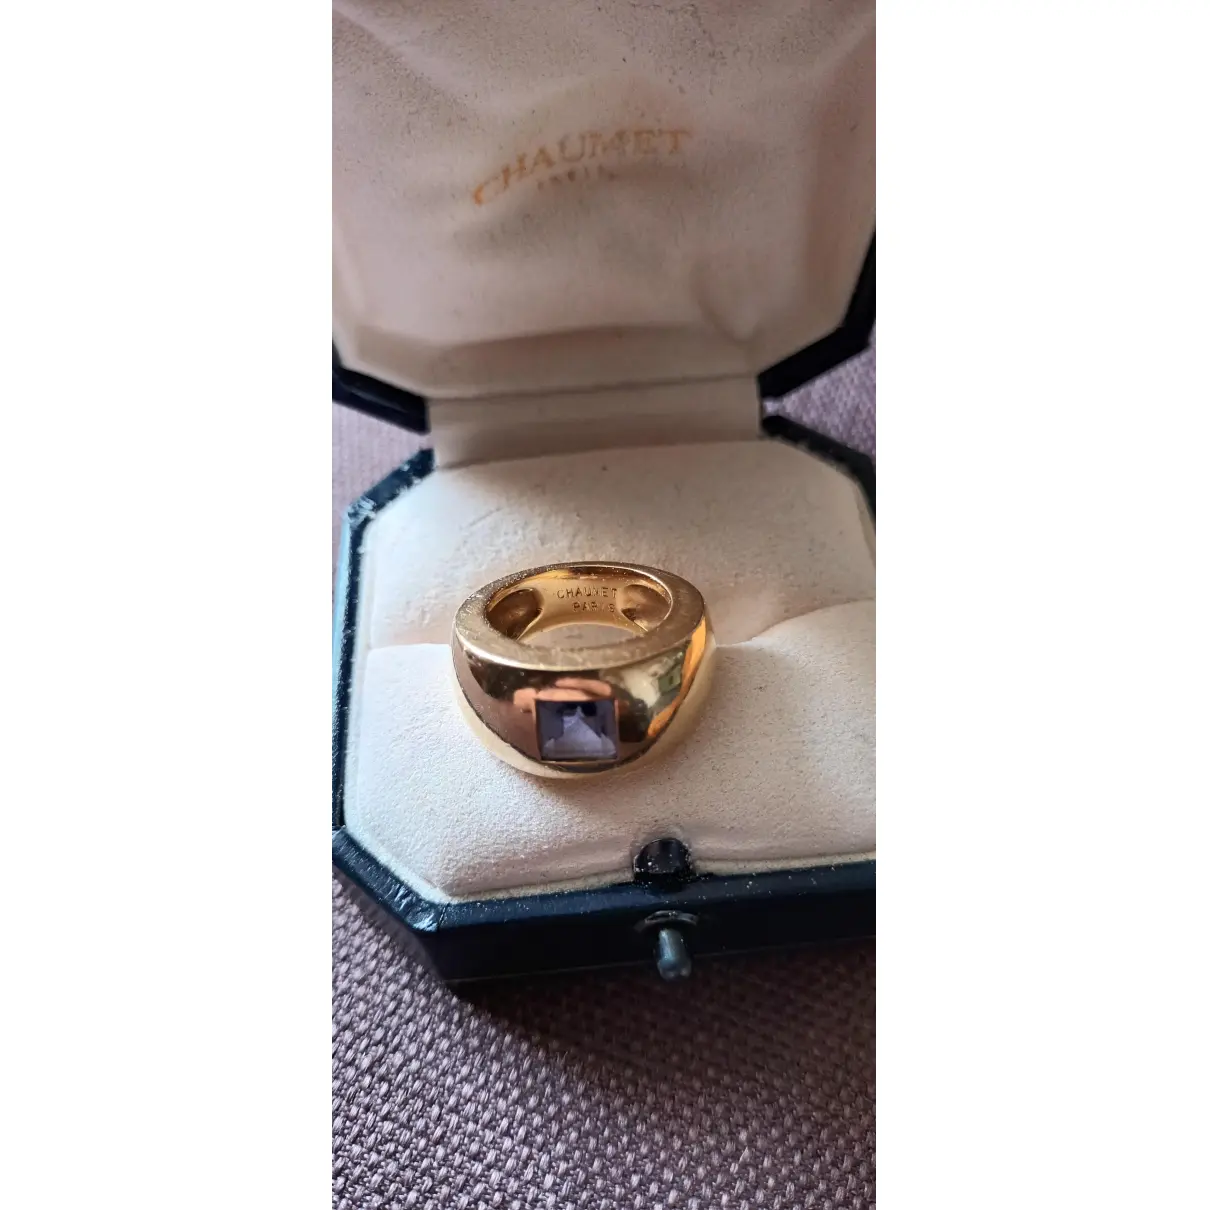 Buy Chaumet Anneau yellow gold ring online